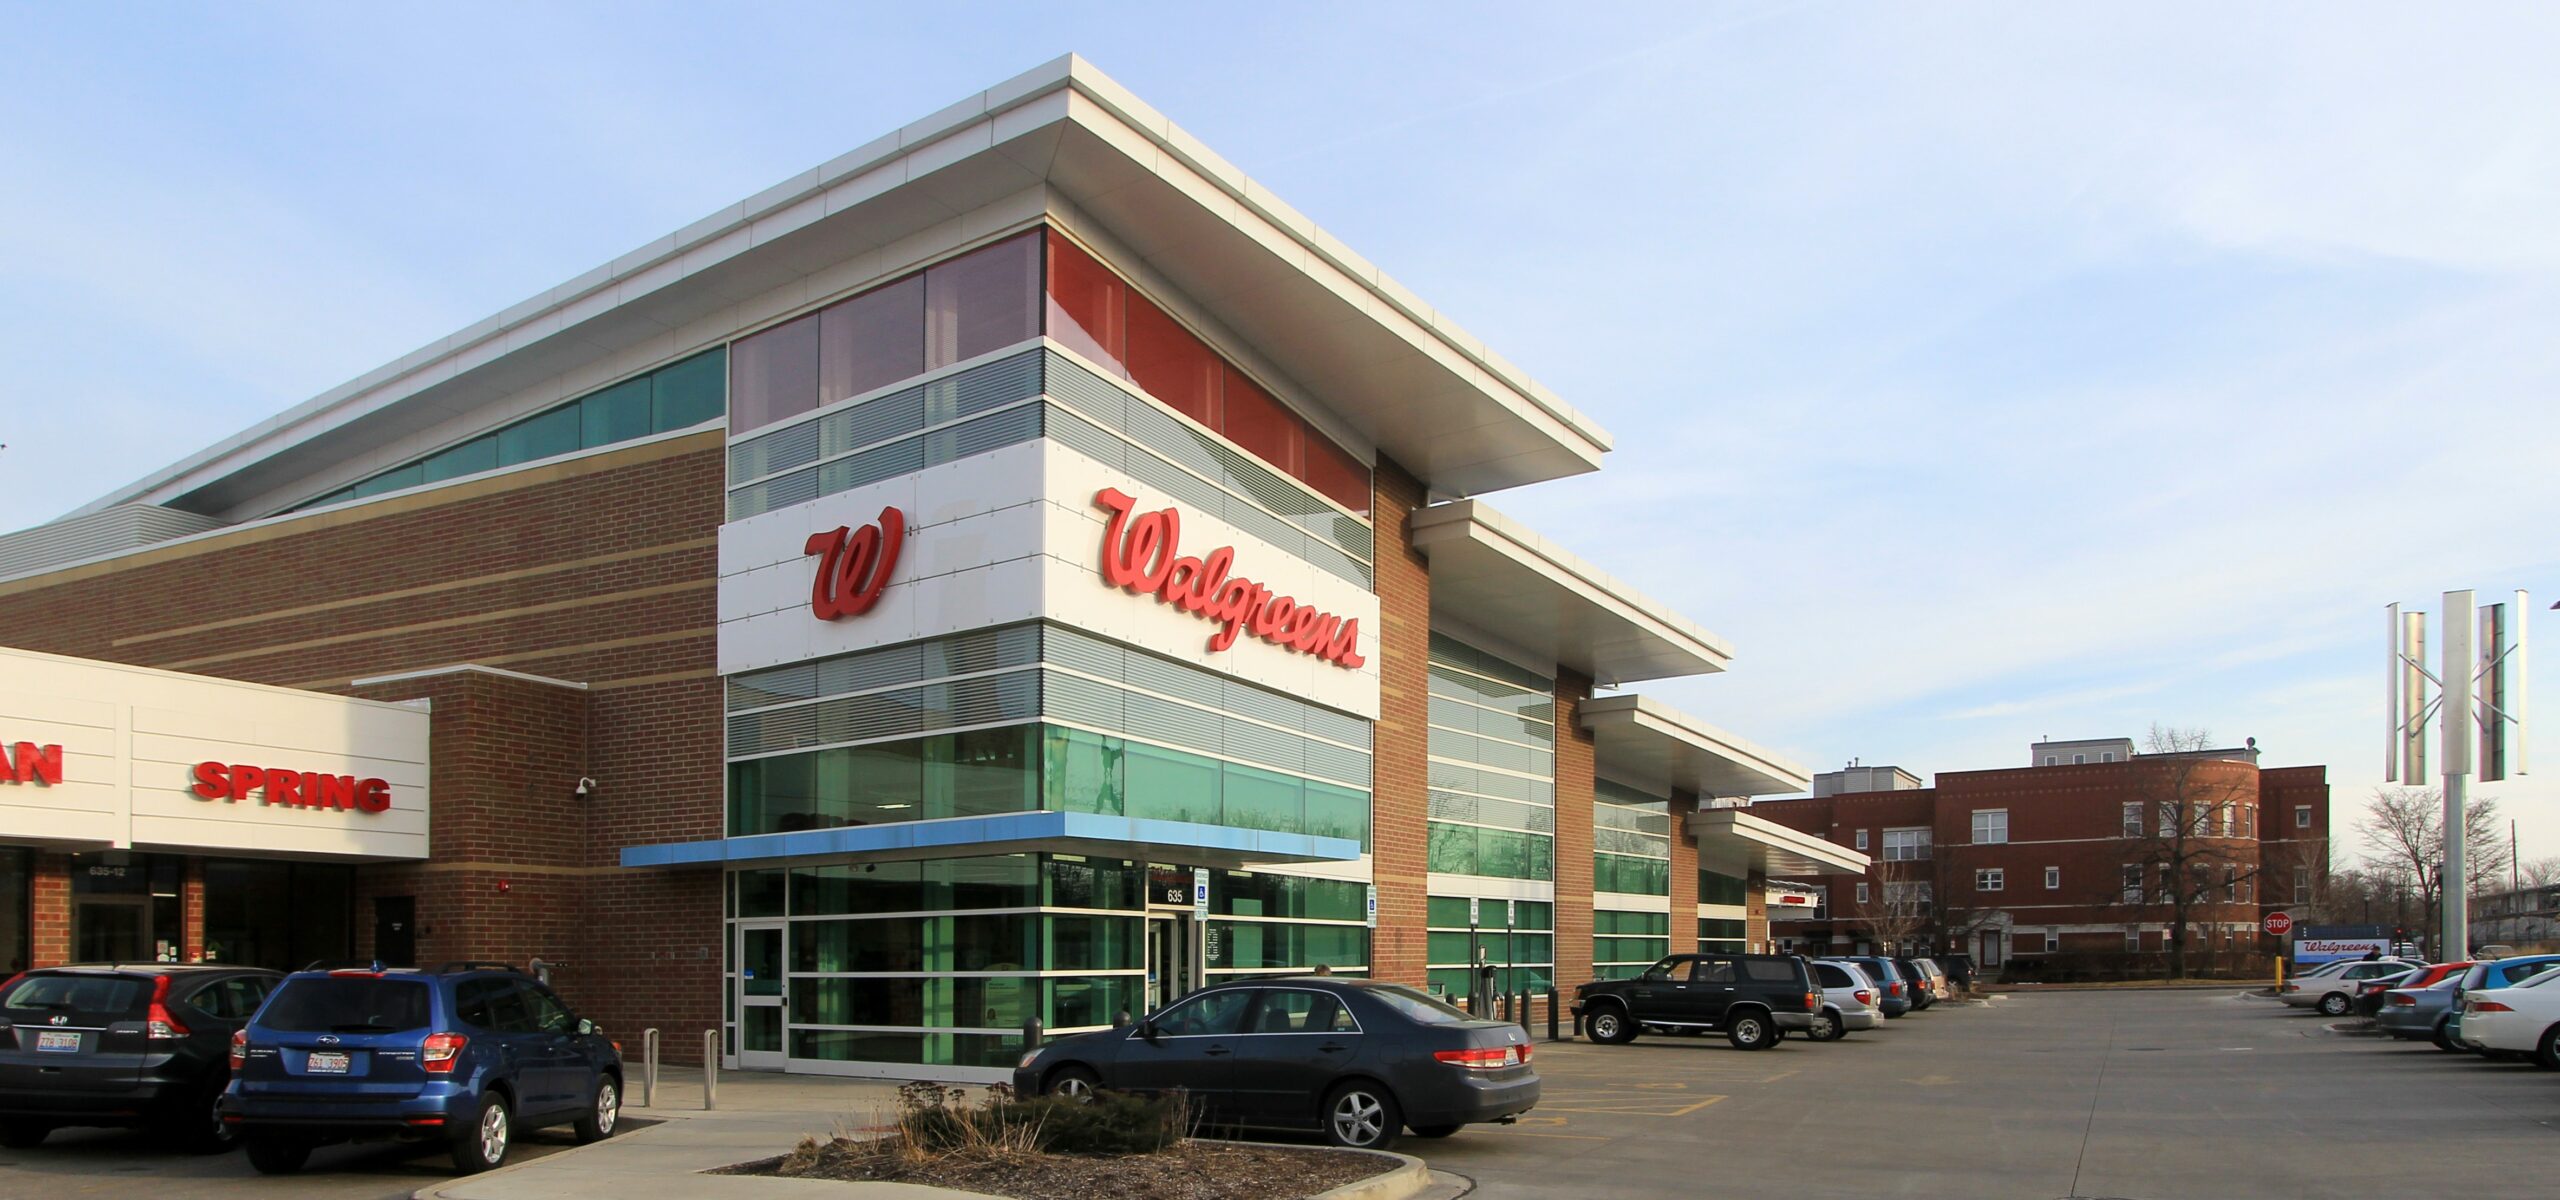 Discover The Best Deals At Walgreens: Your Trusted Source For Quality Products And Services